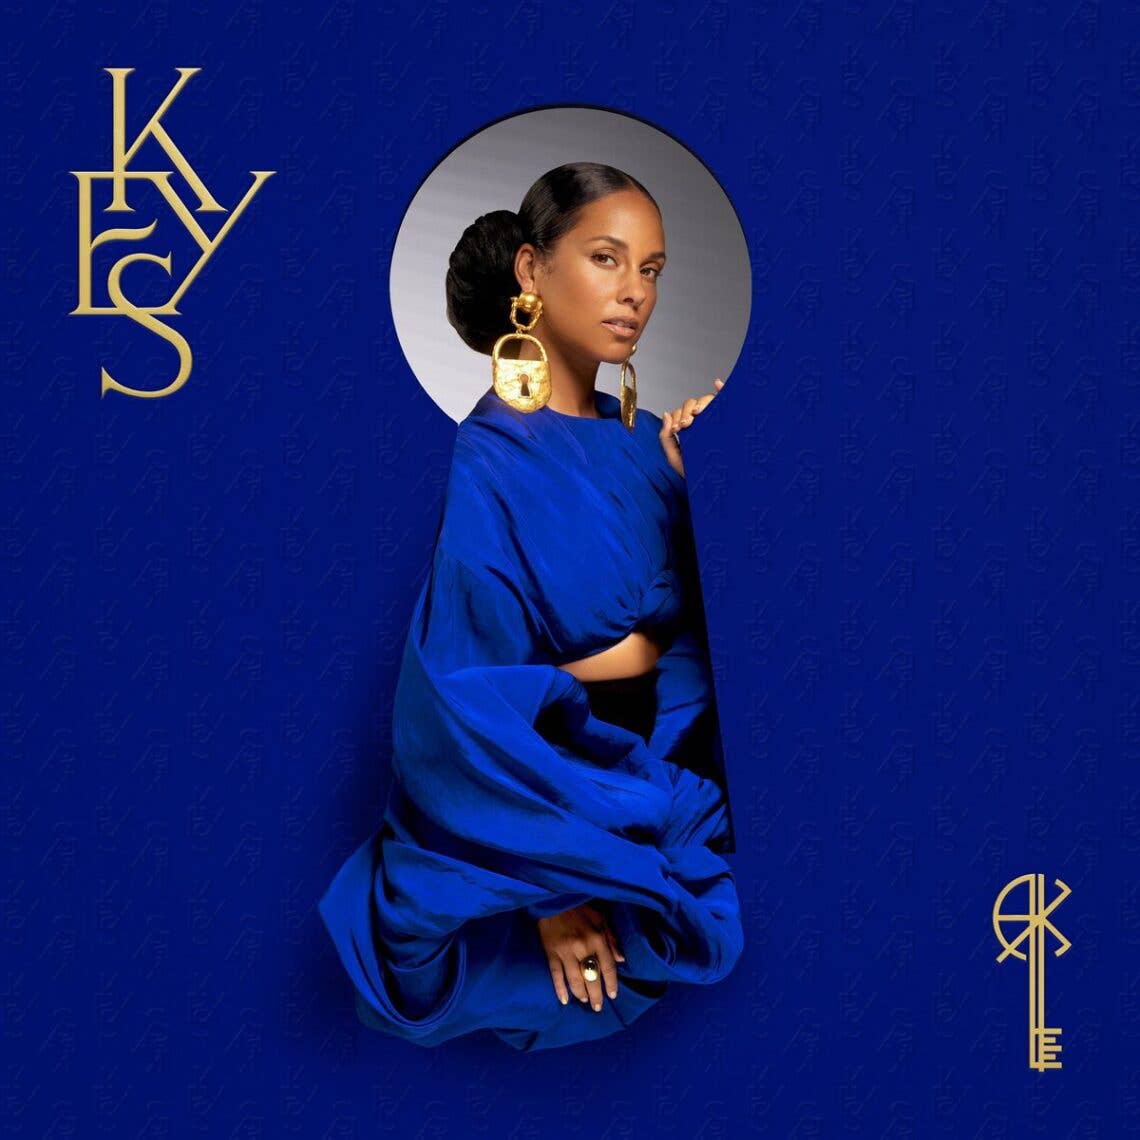 Alicia Keys Doesn't Go By Her Real Name. Here's Why